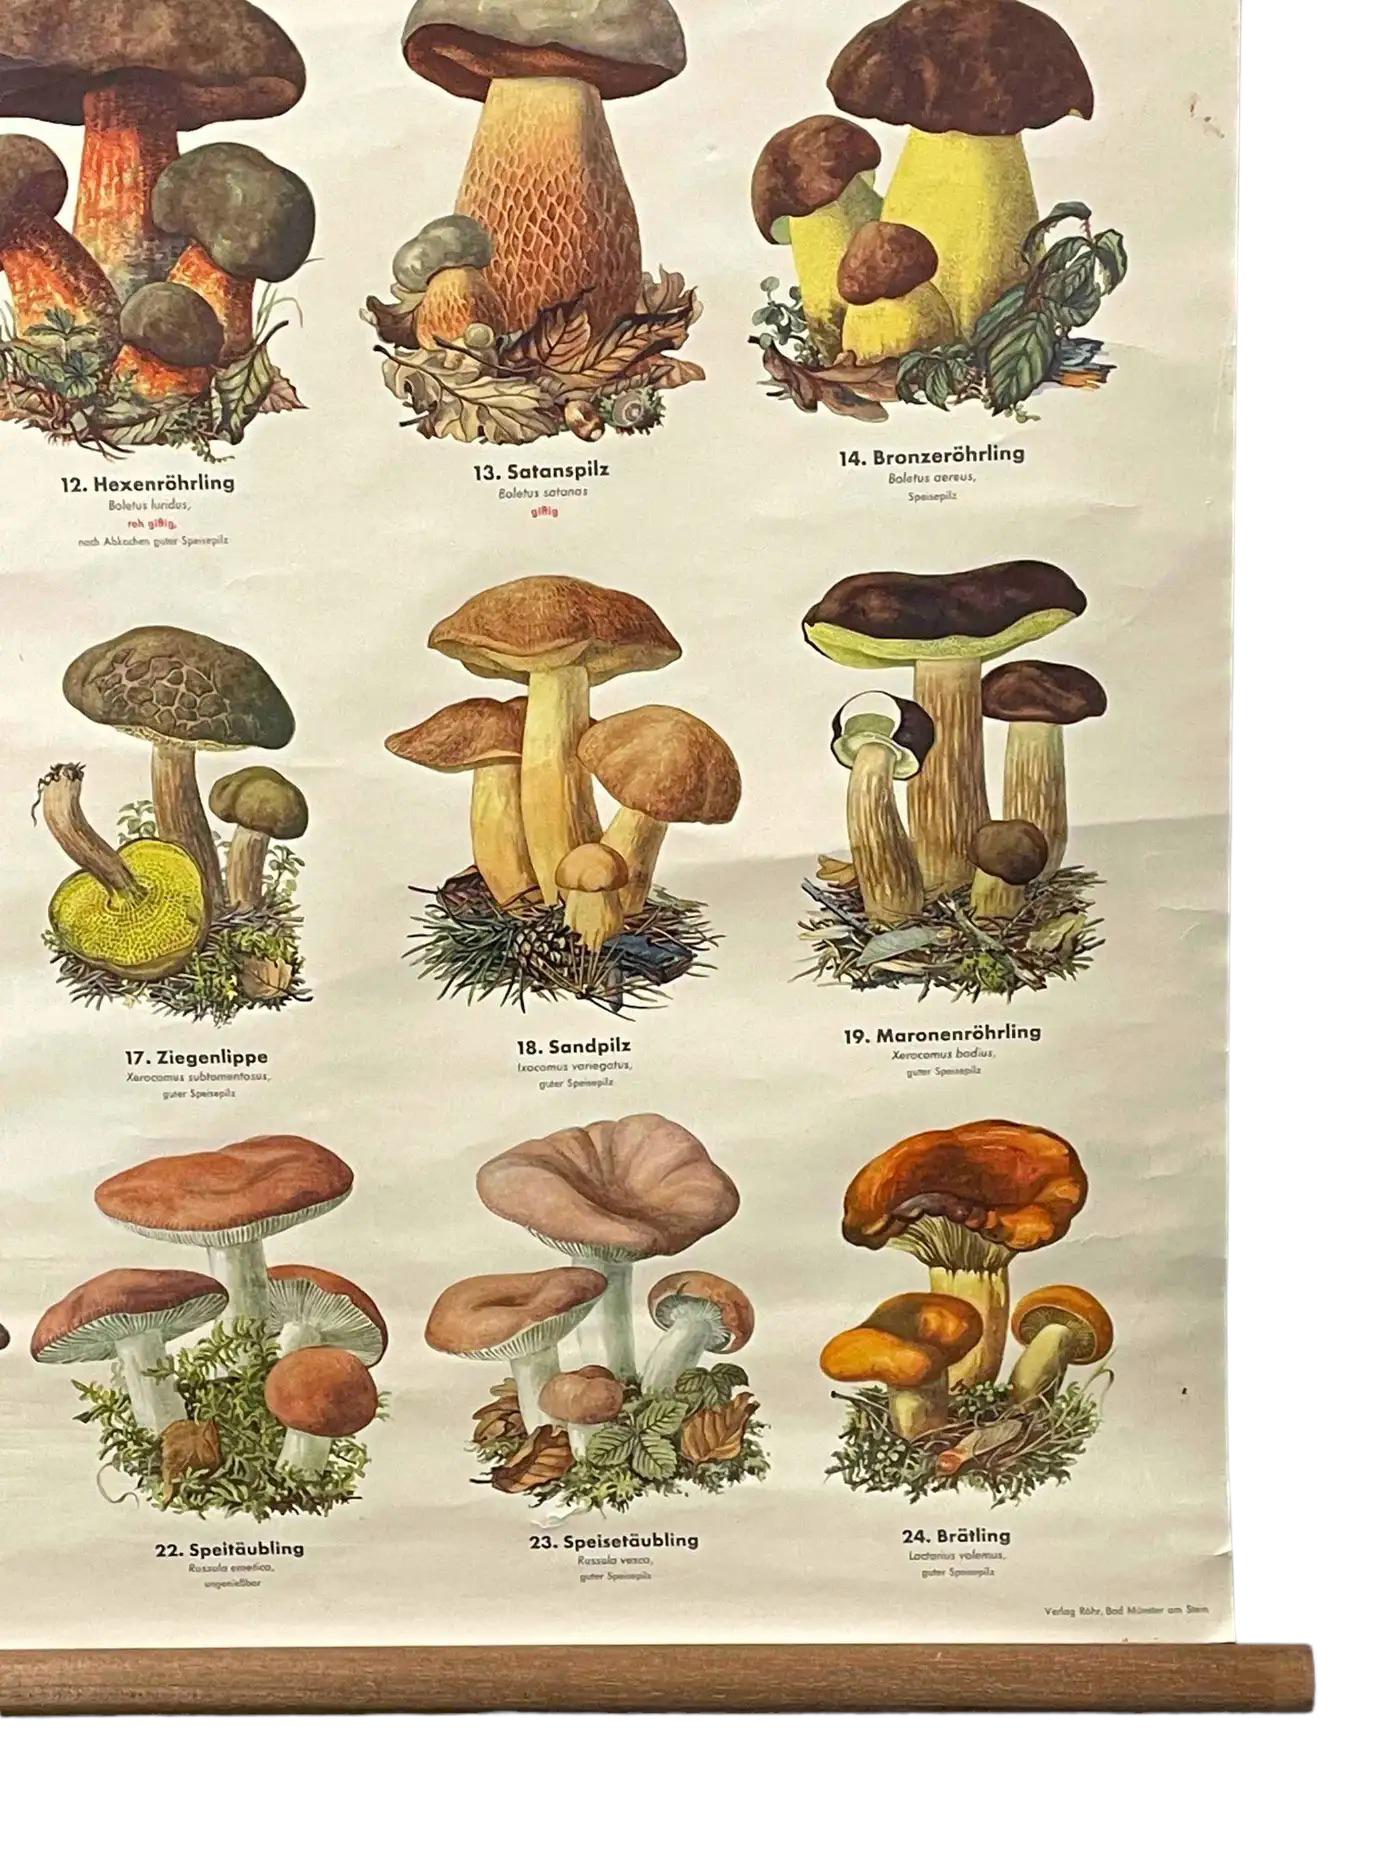 Mushrooms of Europe Rollable Poster Print Wall Chart, Austria 1950s 6